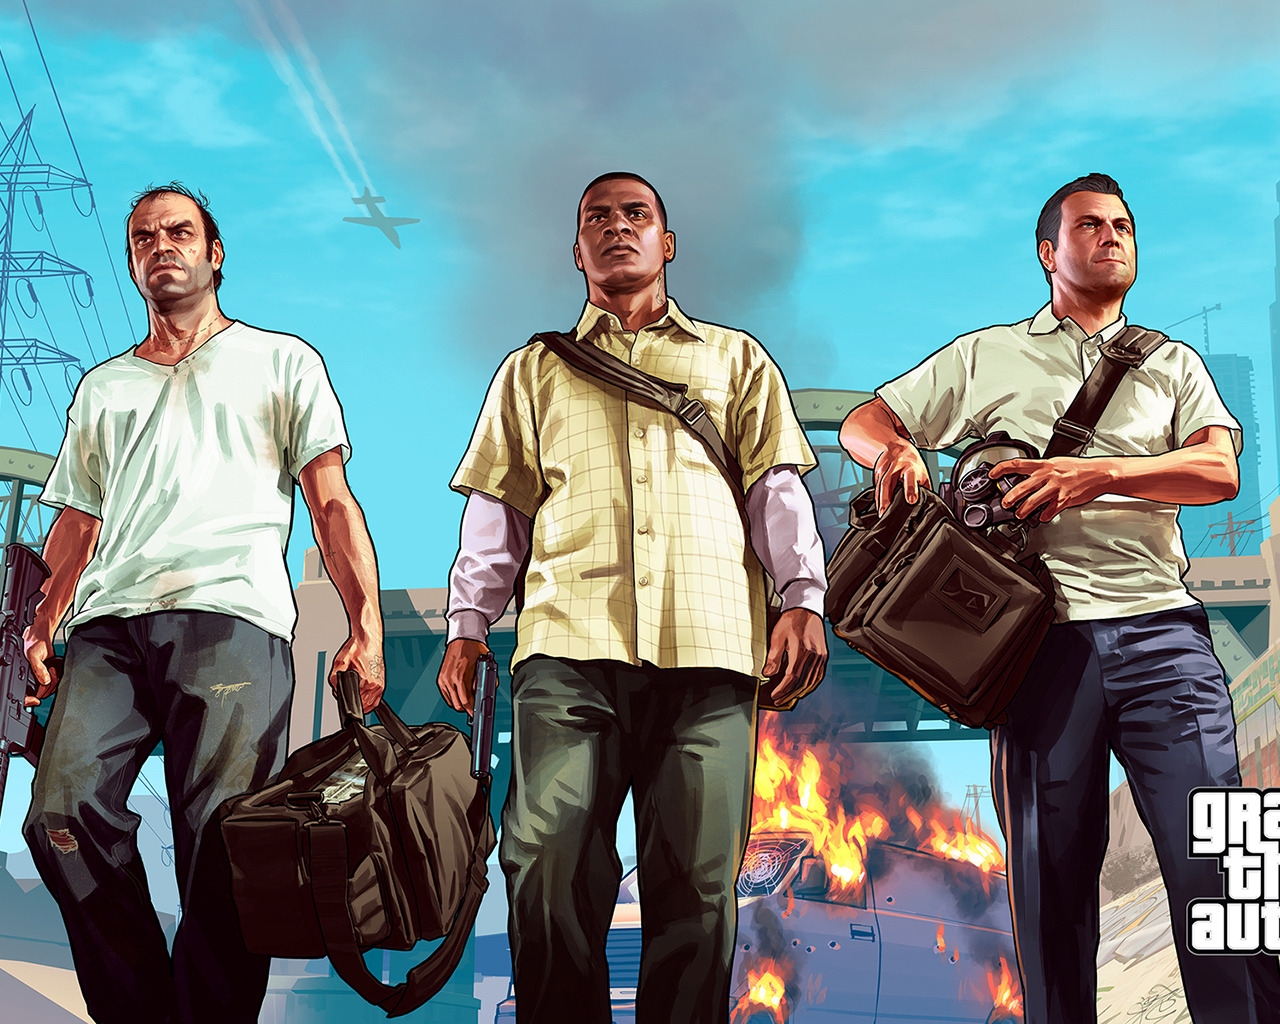 Gta 5 Main Characters for 1280 x 1024 resolution